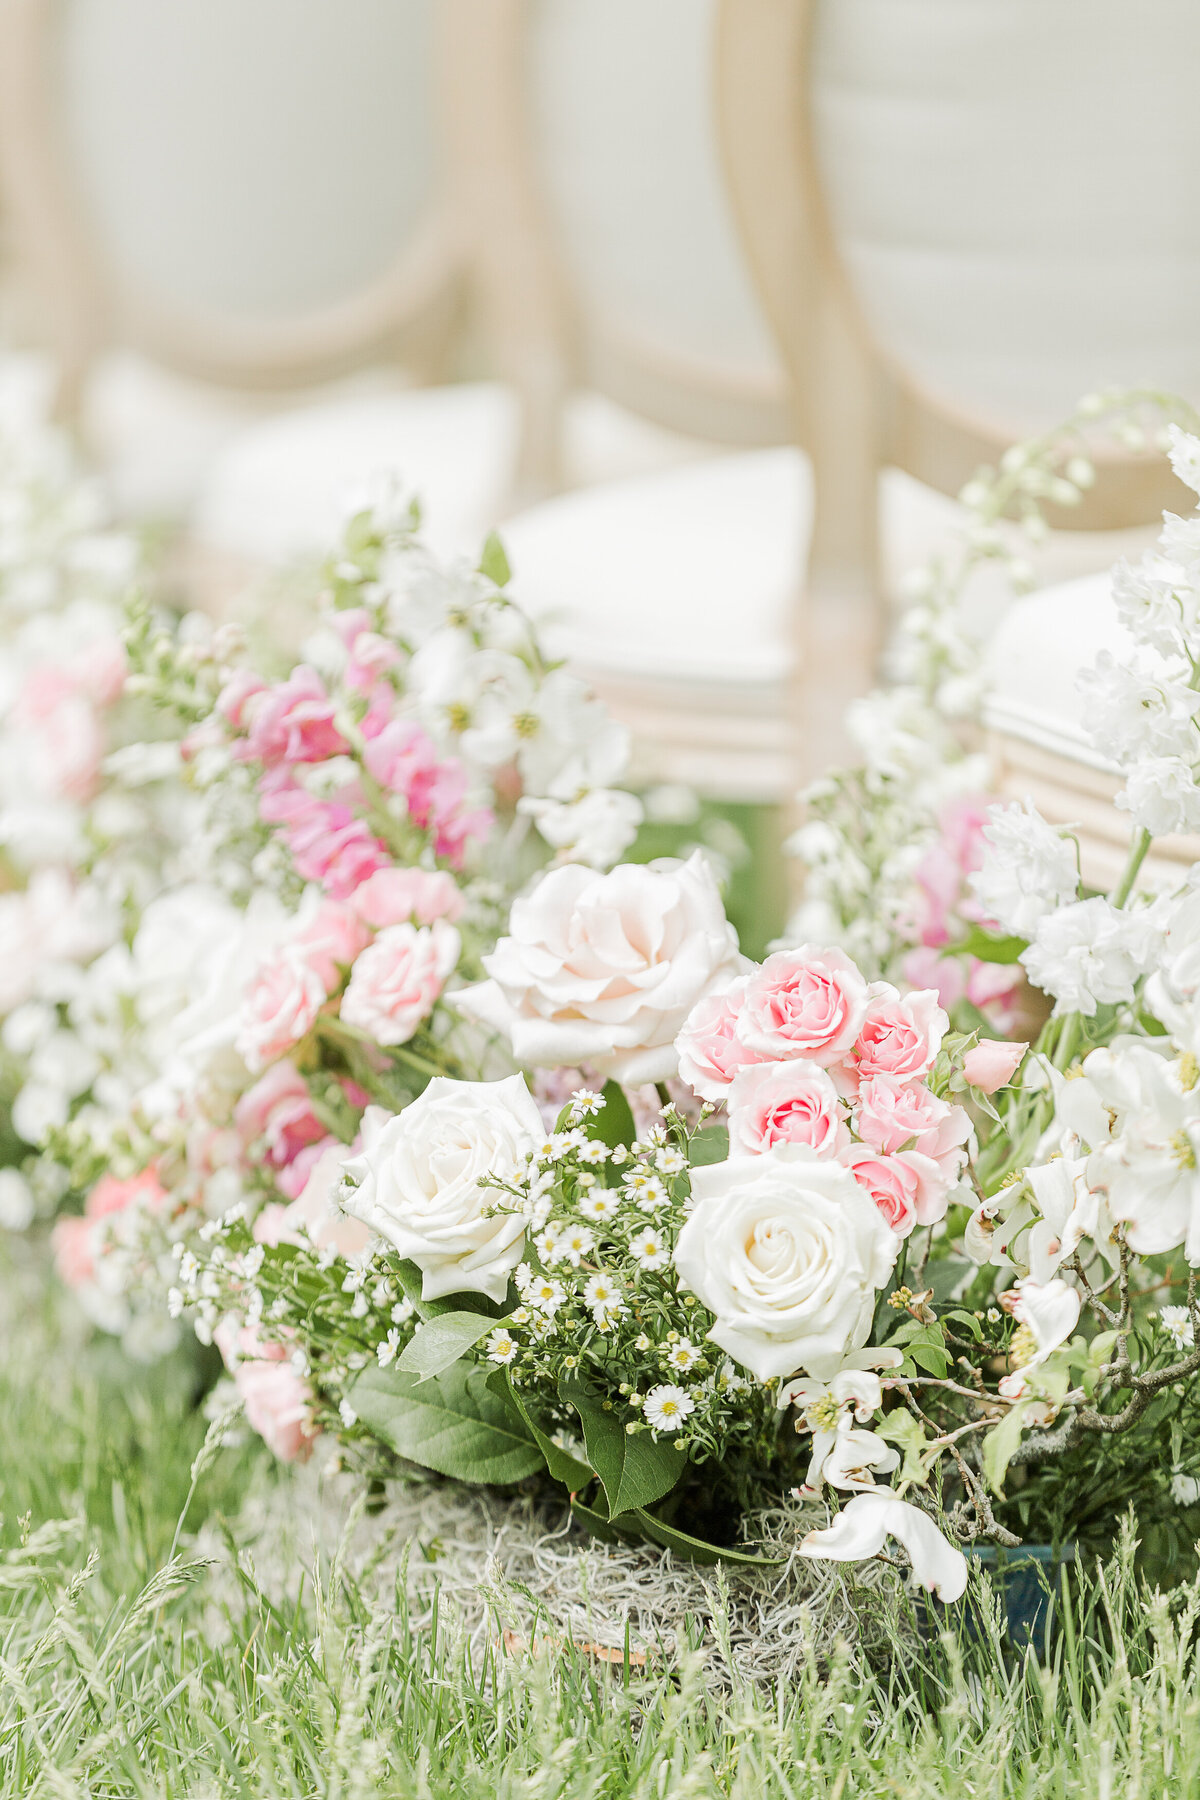 Detail image of flowers in grass alongside the wedding aisle.